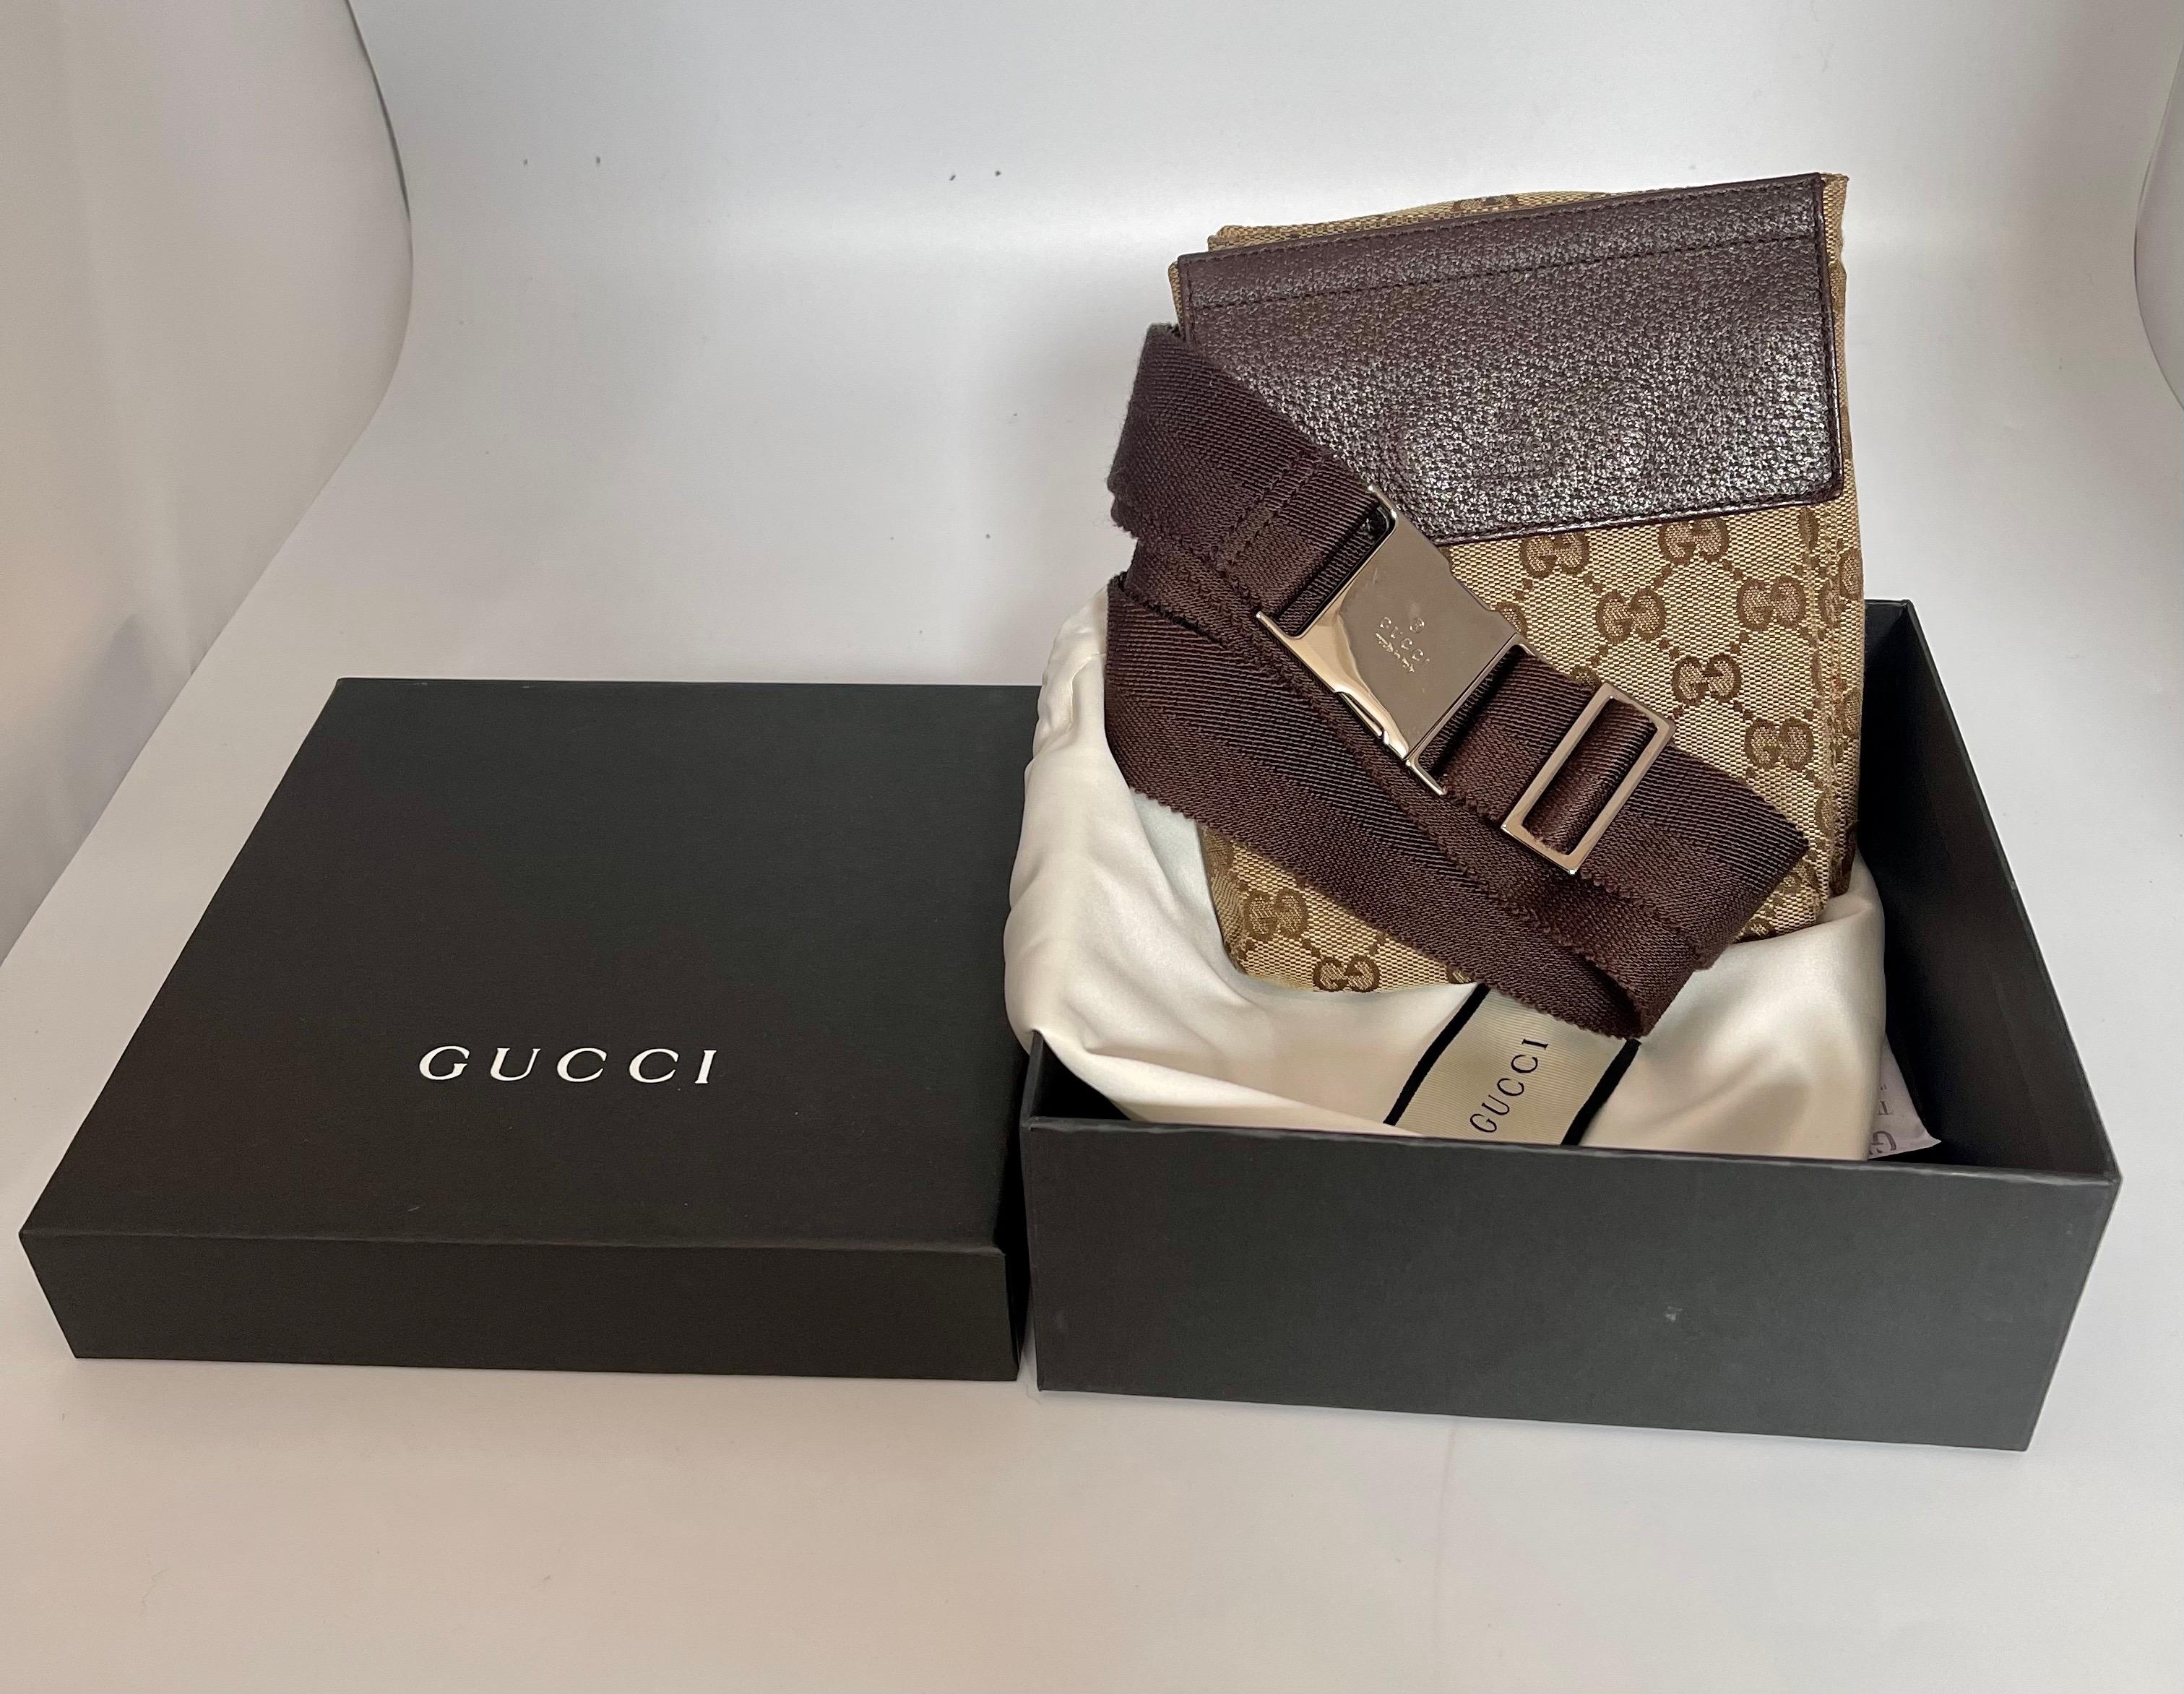 Gucci Belt Monogram Web Double Pocket Brown GG Supreme Canvas Cross Body Belt  Bag
GUCCI WAIST BELT BAG BEIGE EBONY GG FABRIC WITH CHOCOLATE LEATHER TRIM
Condition Quality: Very nice
Color: Brown
Height: 6.2500
Length: 10.7500
Material: